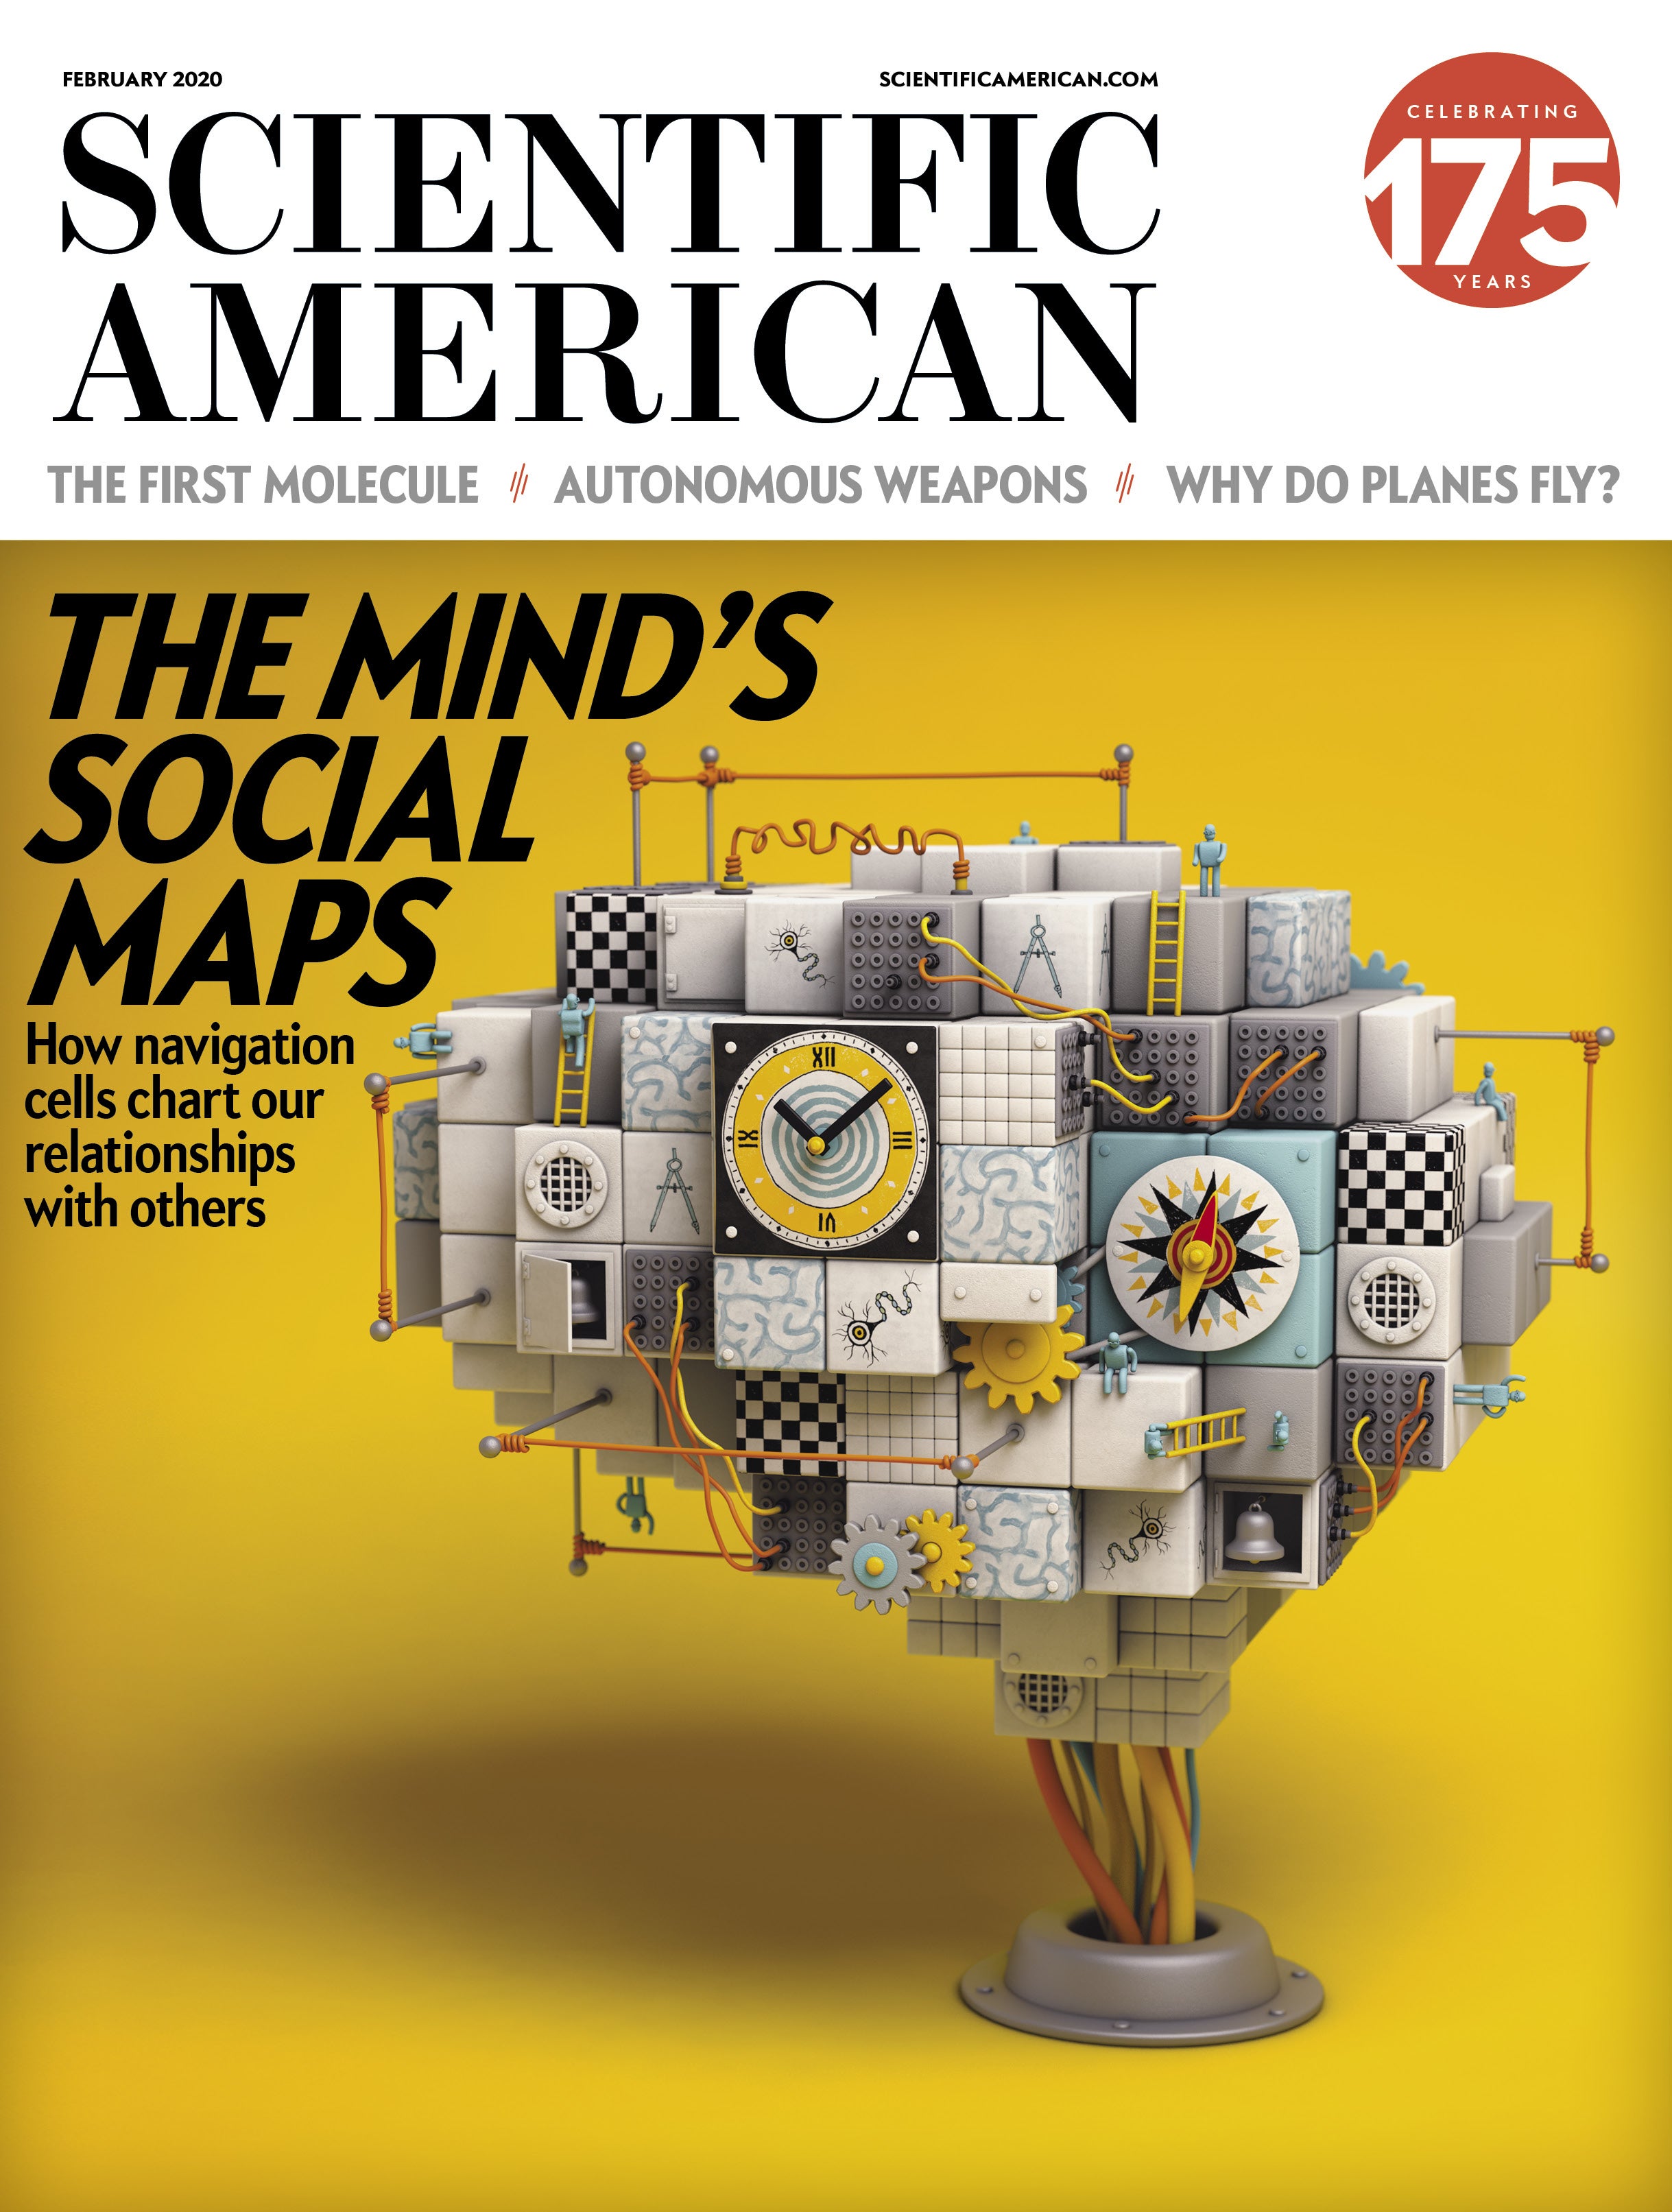 February Issue: The Mind's Social Maps